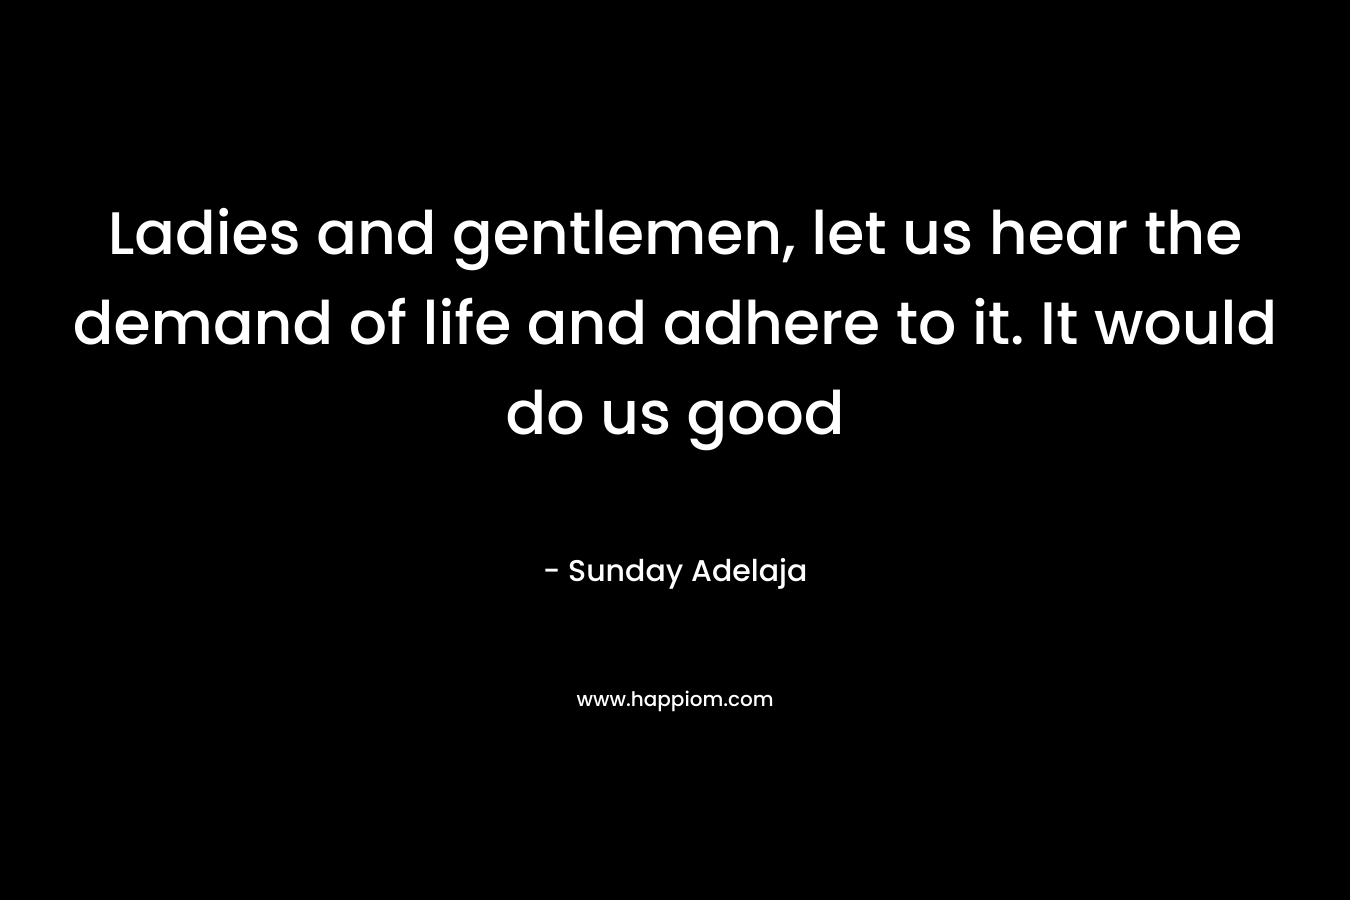 Ladies and gentlemen, let us hear the demand of life and adhere to it. It would do us good – Sunday Adelaja